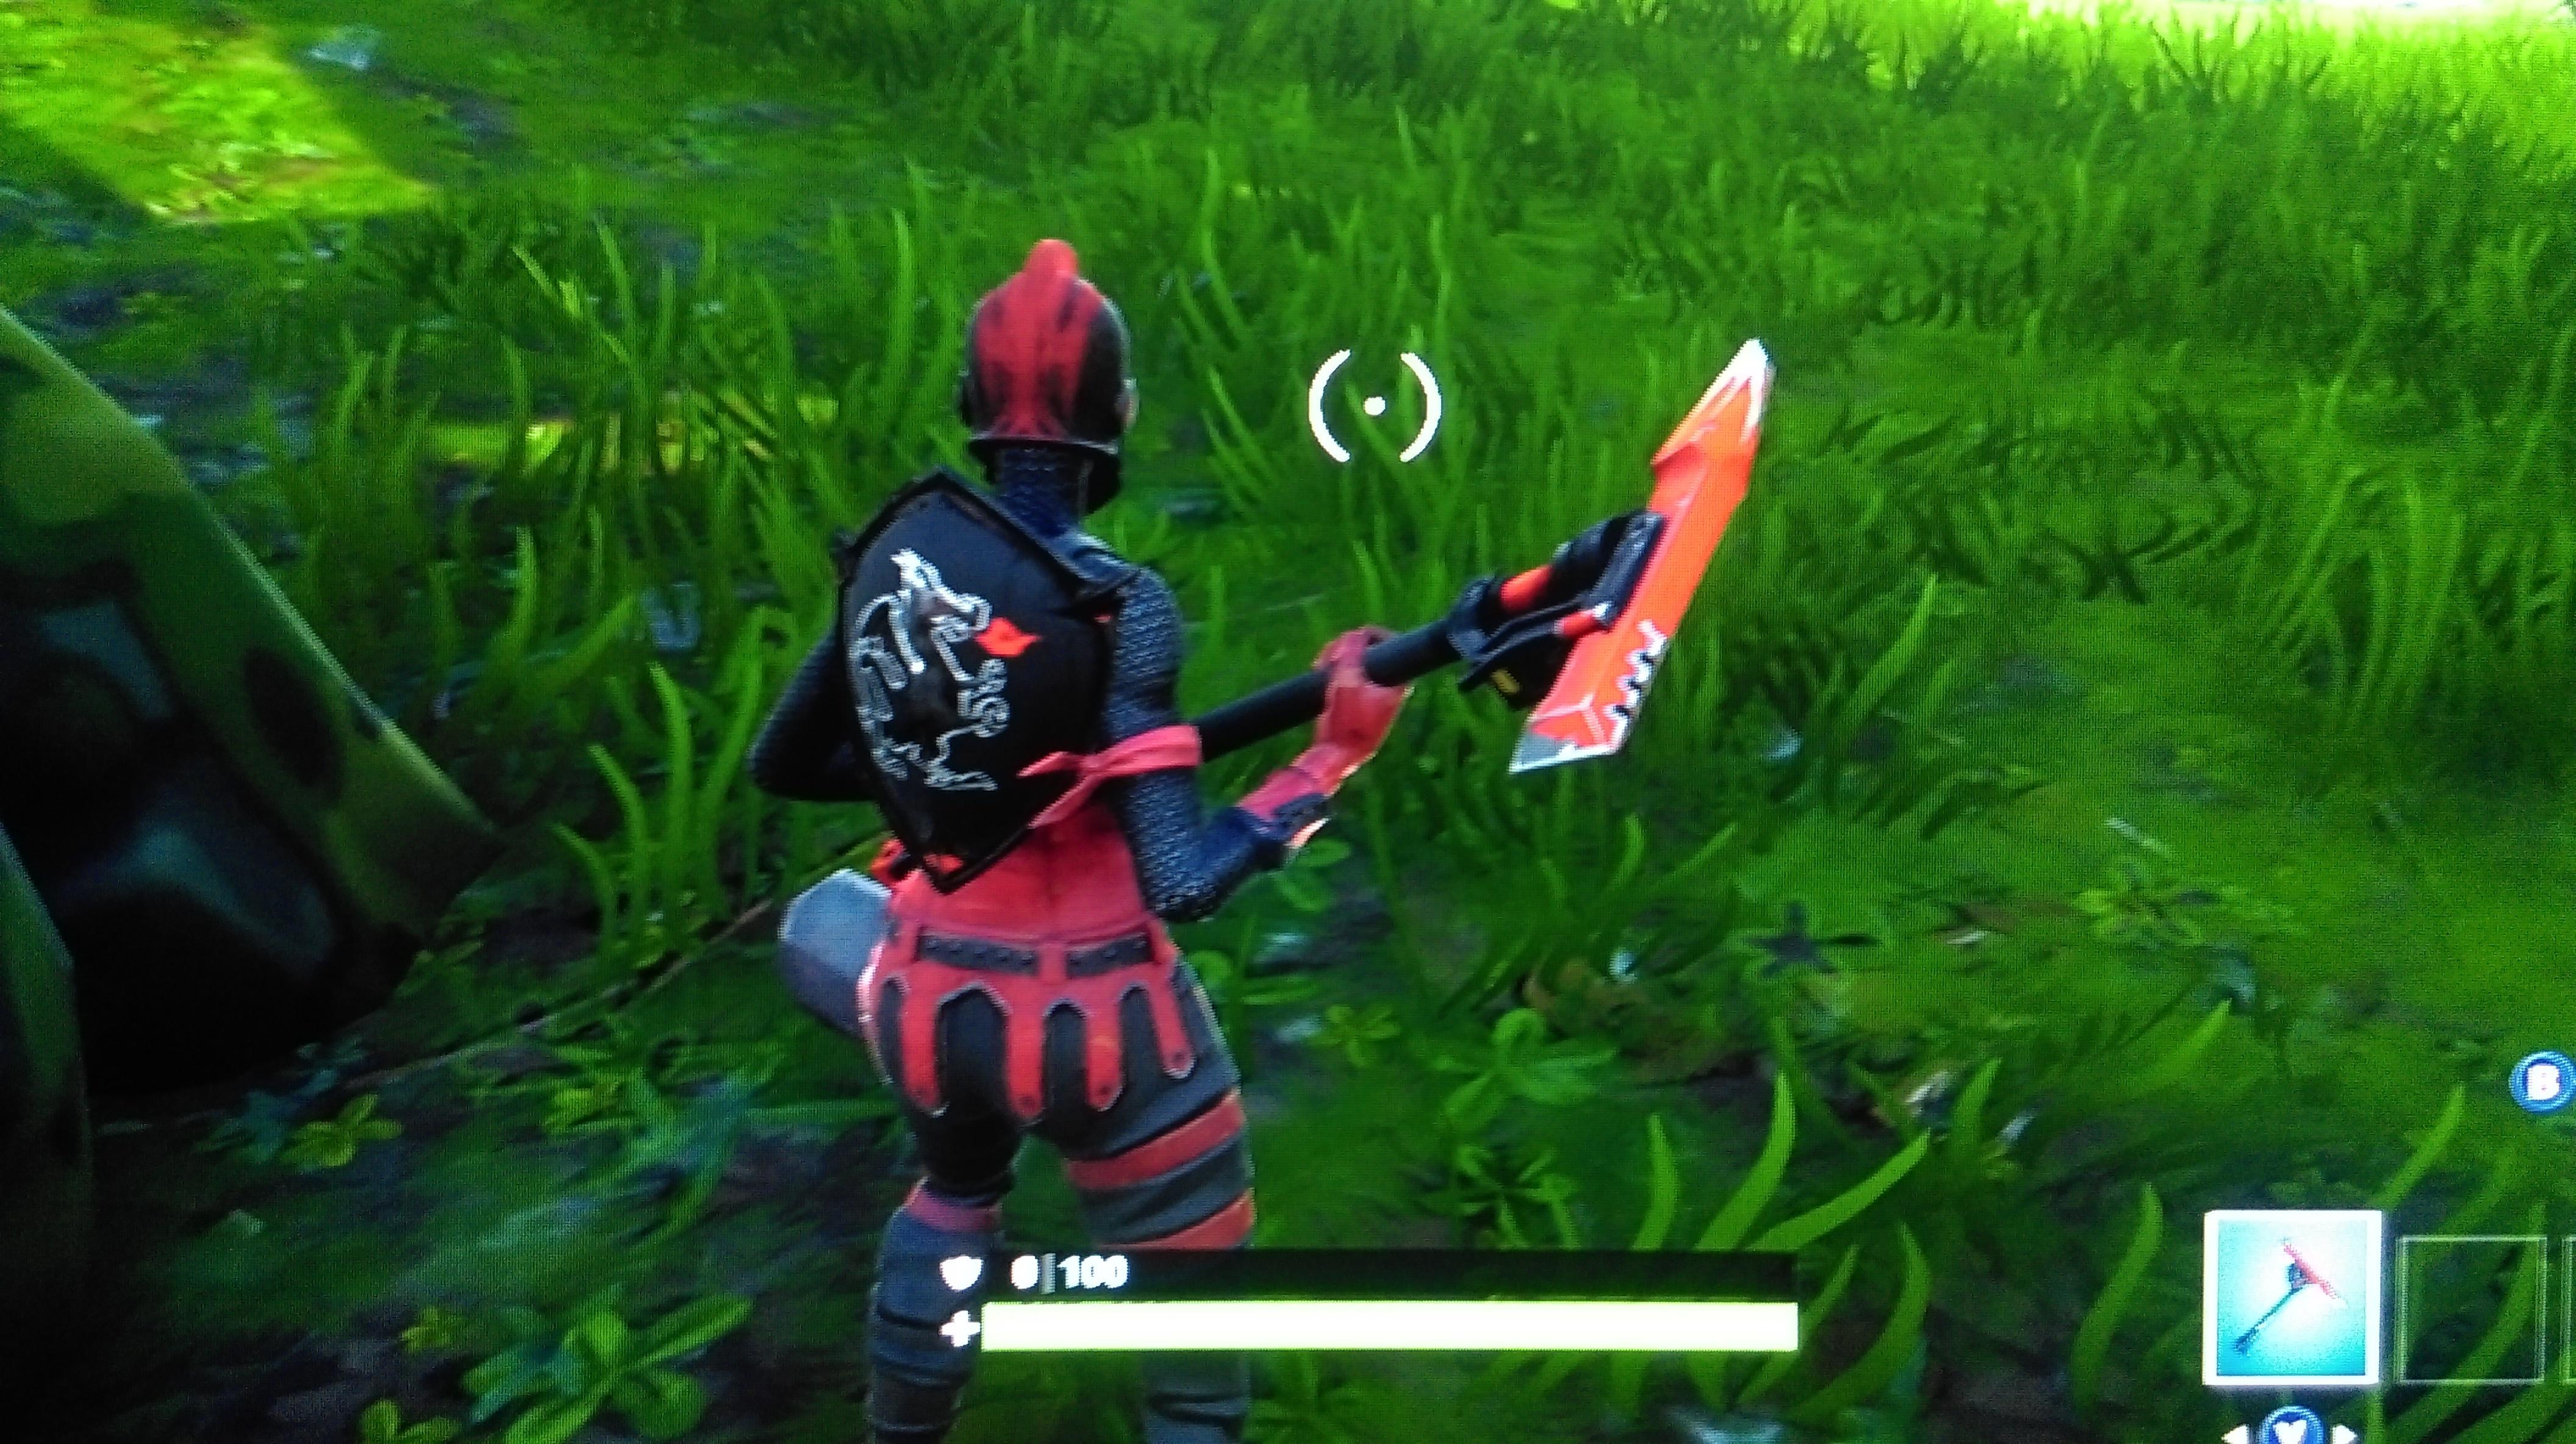 Name of Green and Red Shield Logo - Just saw someone post about Black Knight with Red Shield, This looks ...